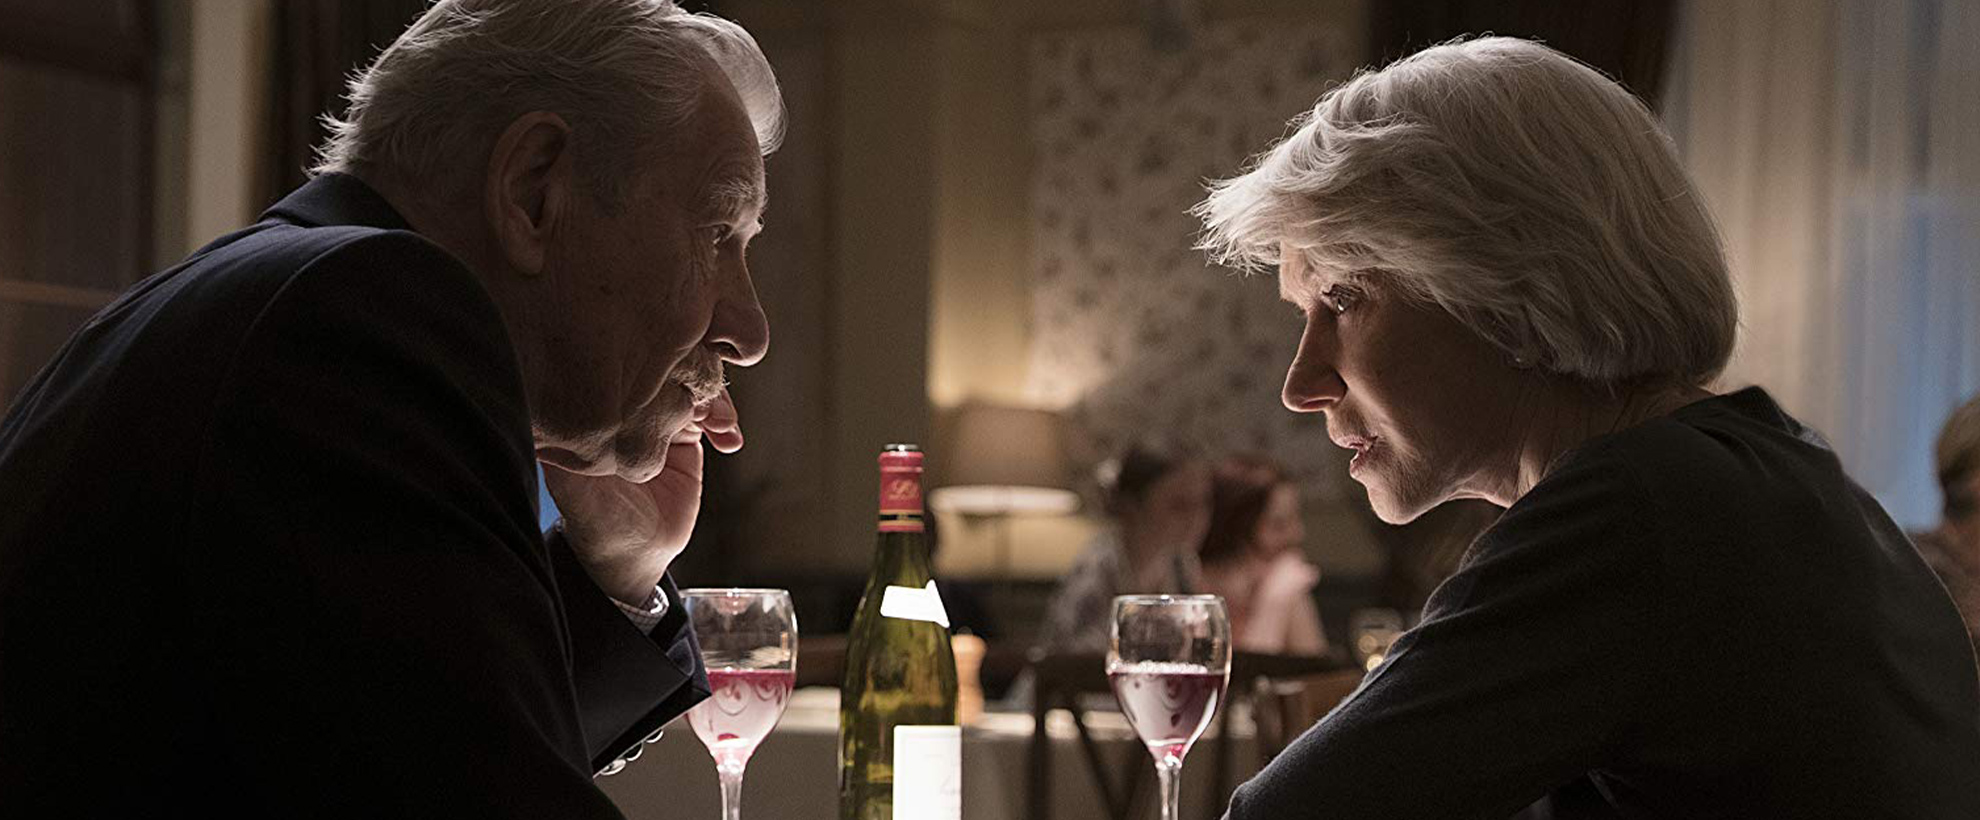 Ian McKellen and Helen Mirren sit at a table in a restaurant, talking intently